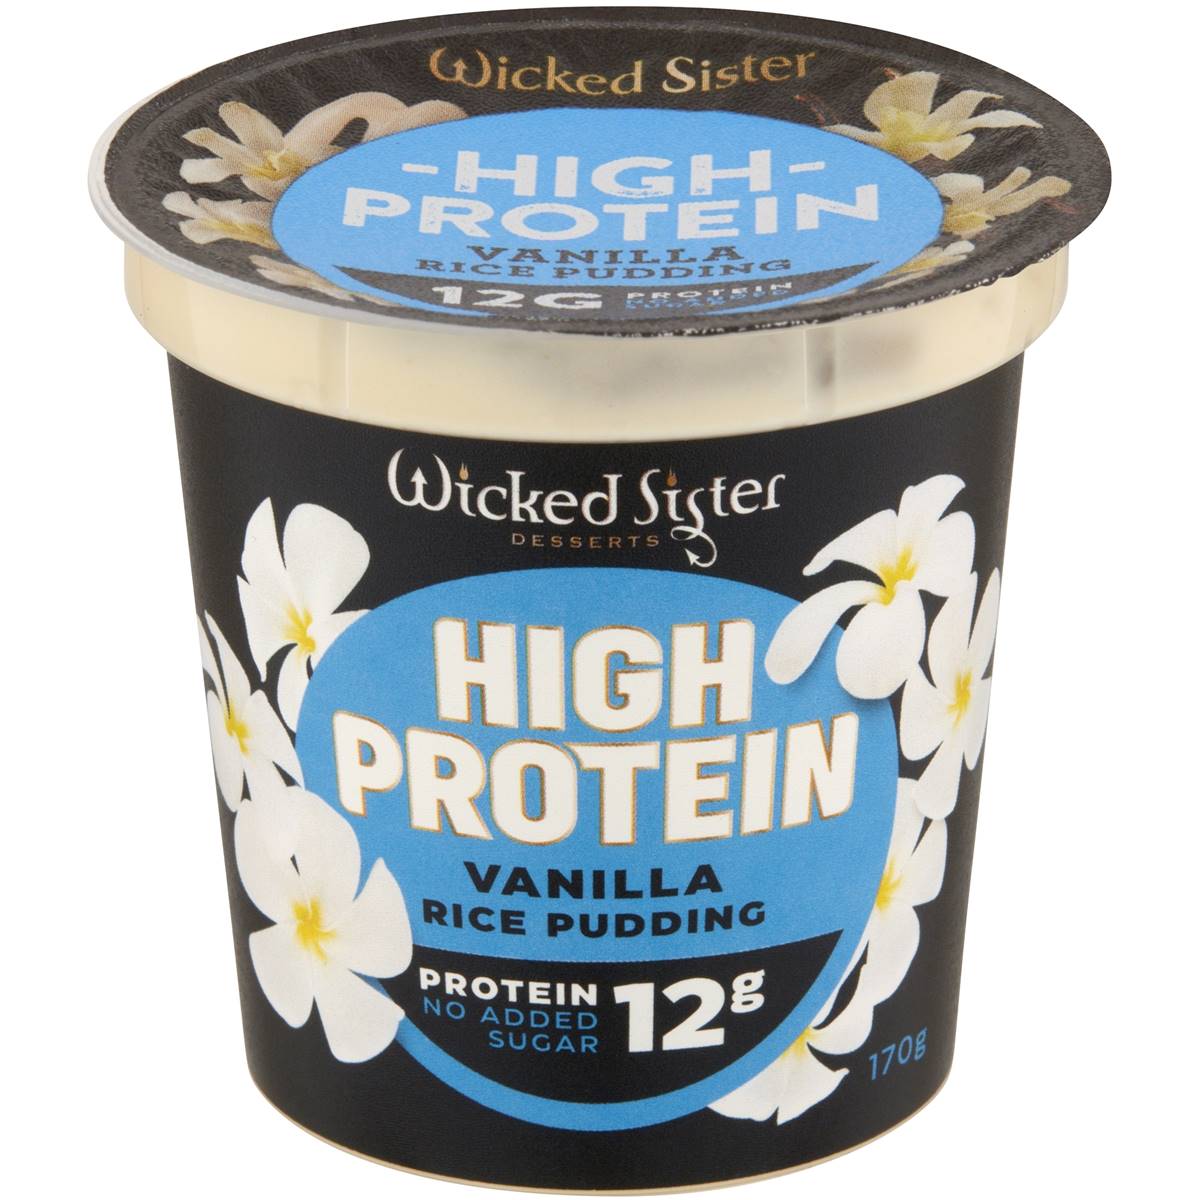 Calories in Wicked Sister High Protein Vanilla Rice Pudding